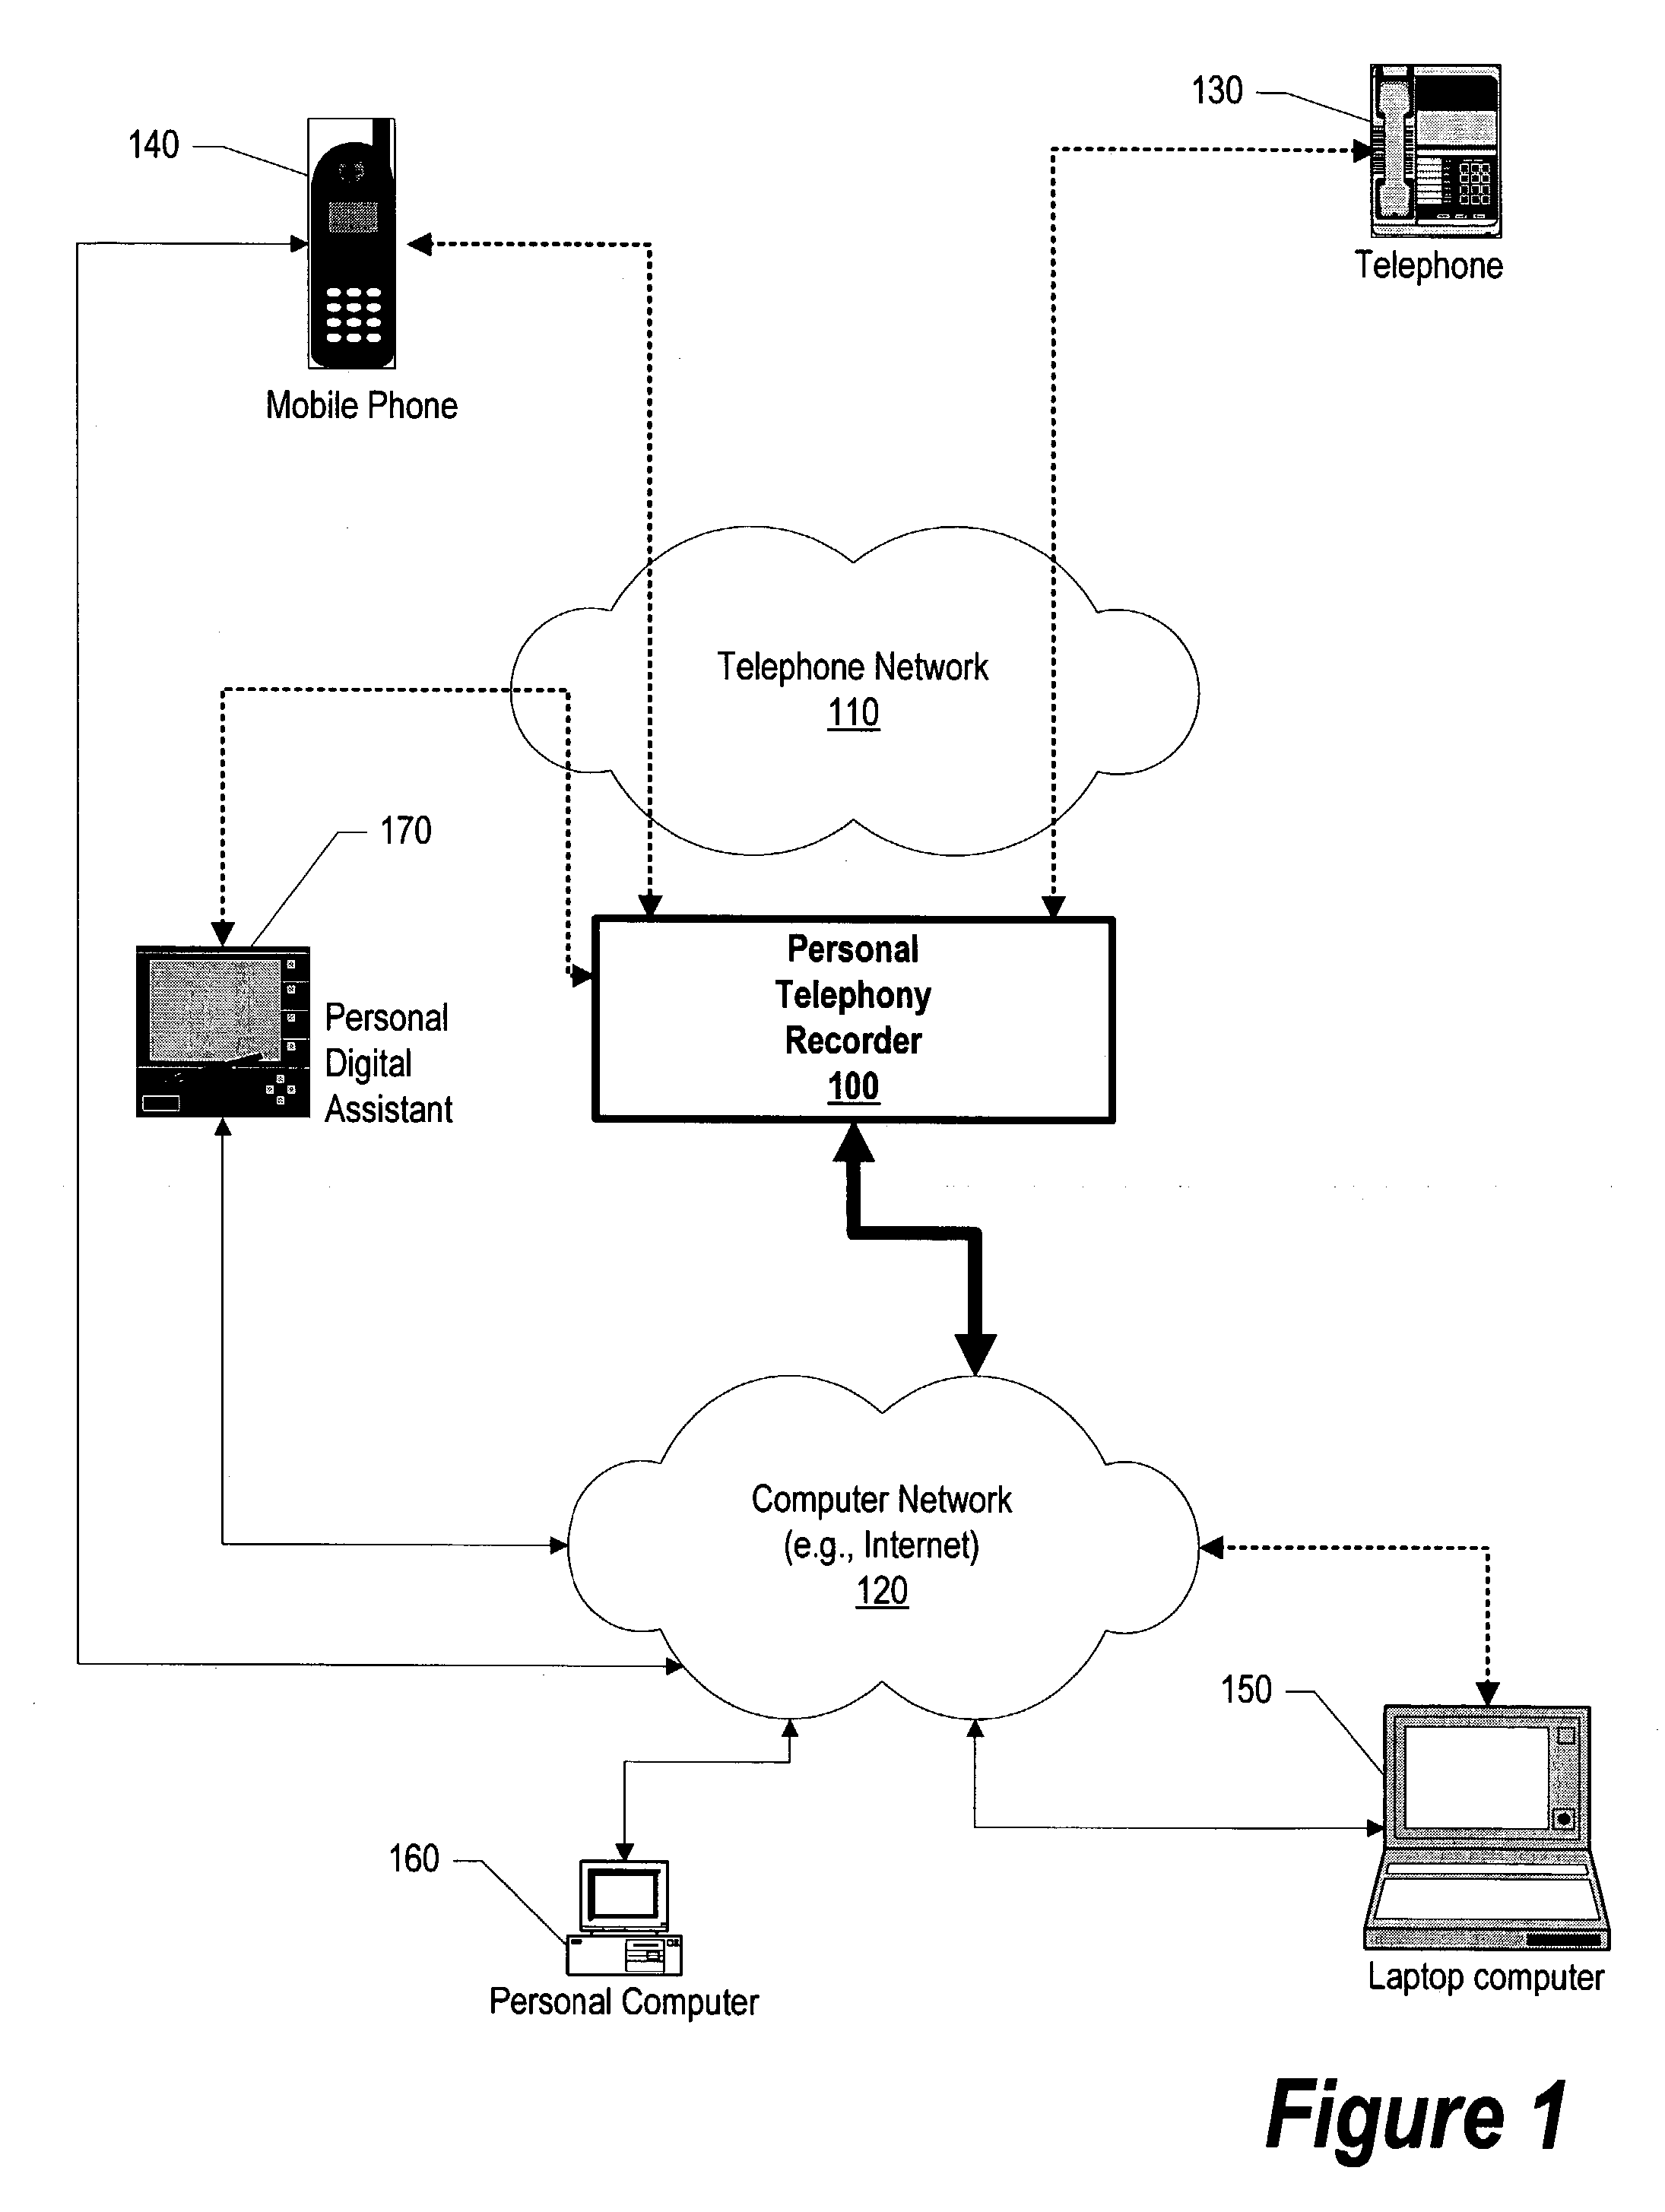 System and method for copying and transmitting telephony conversations